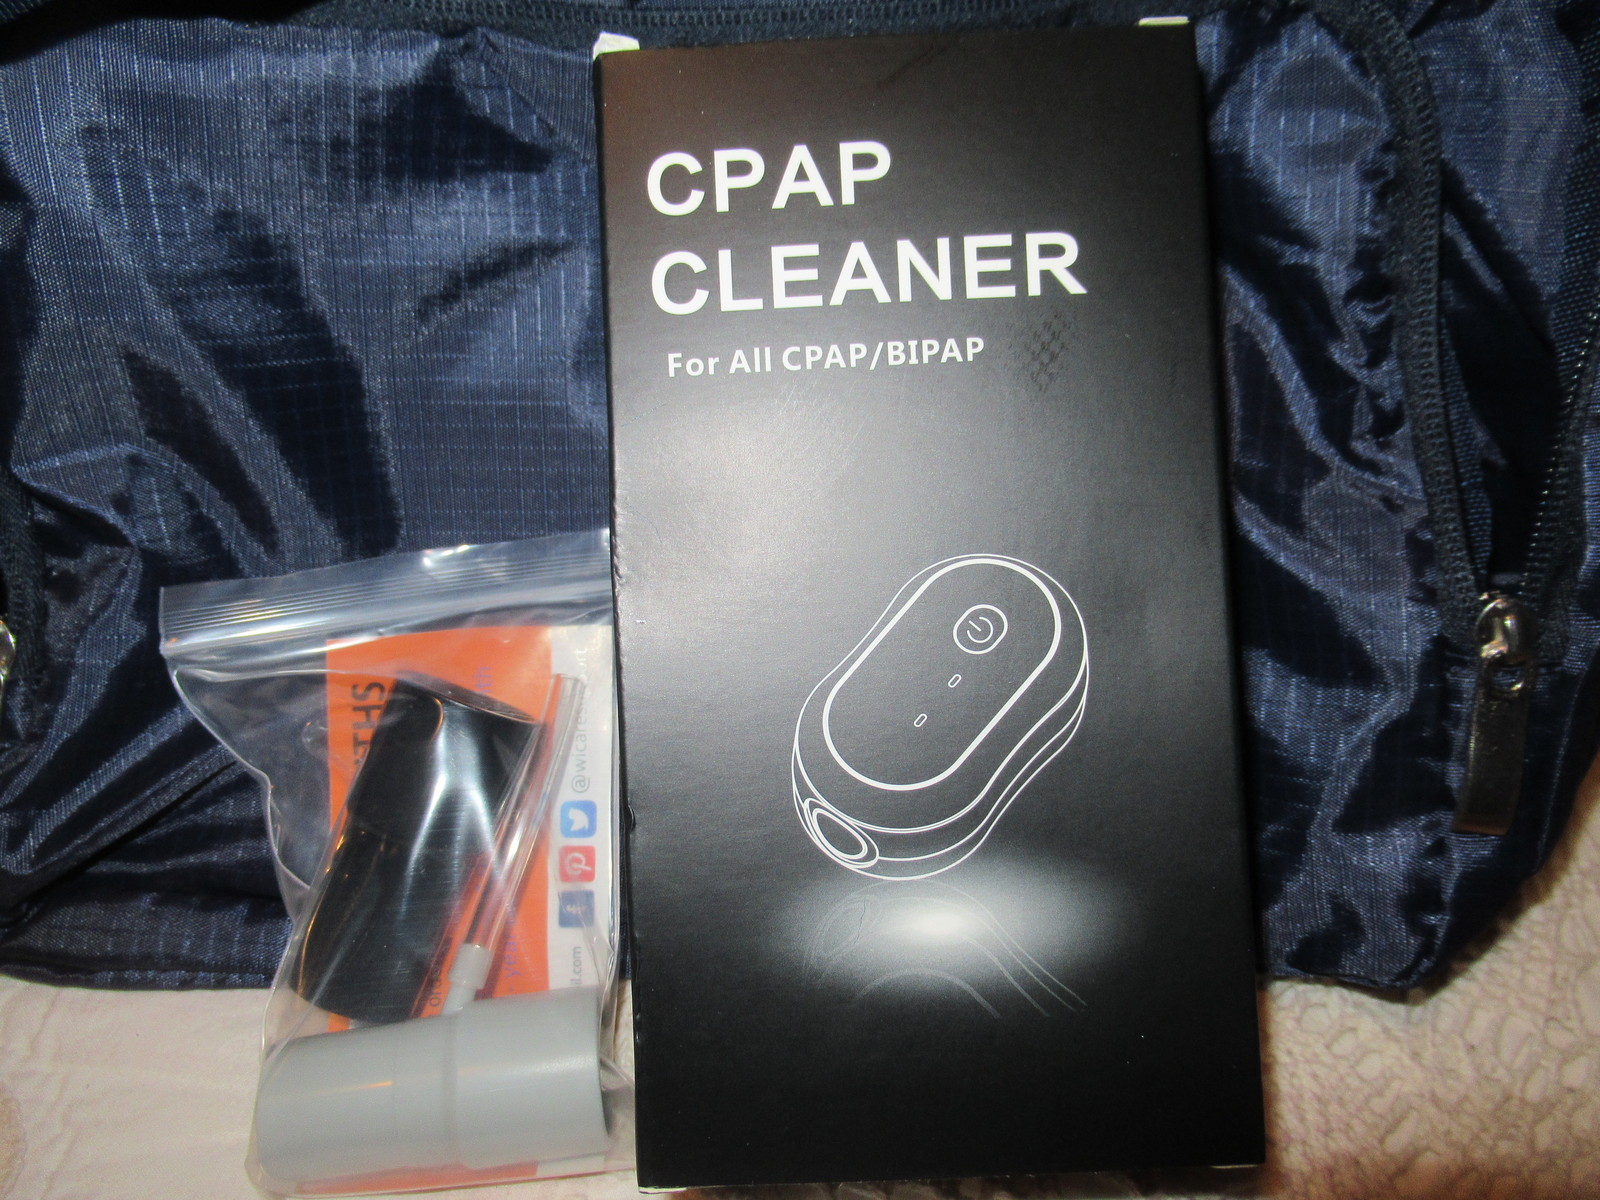 CPAP Cleaner by Wiscky 2 Model WQ40 with Carry Bag